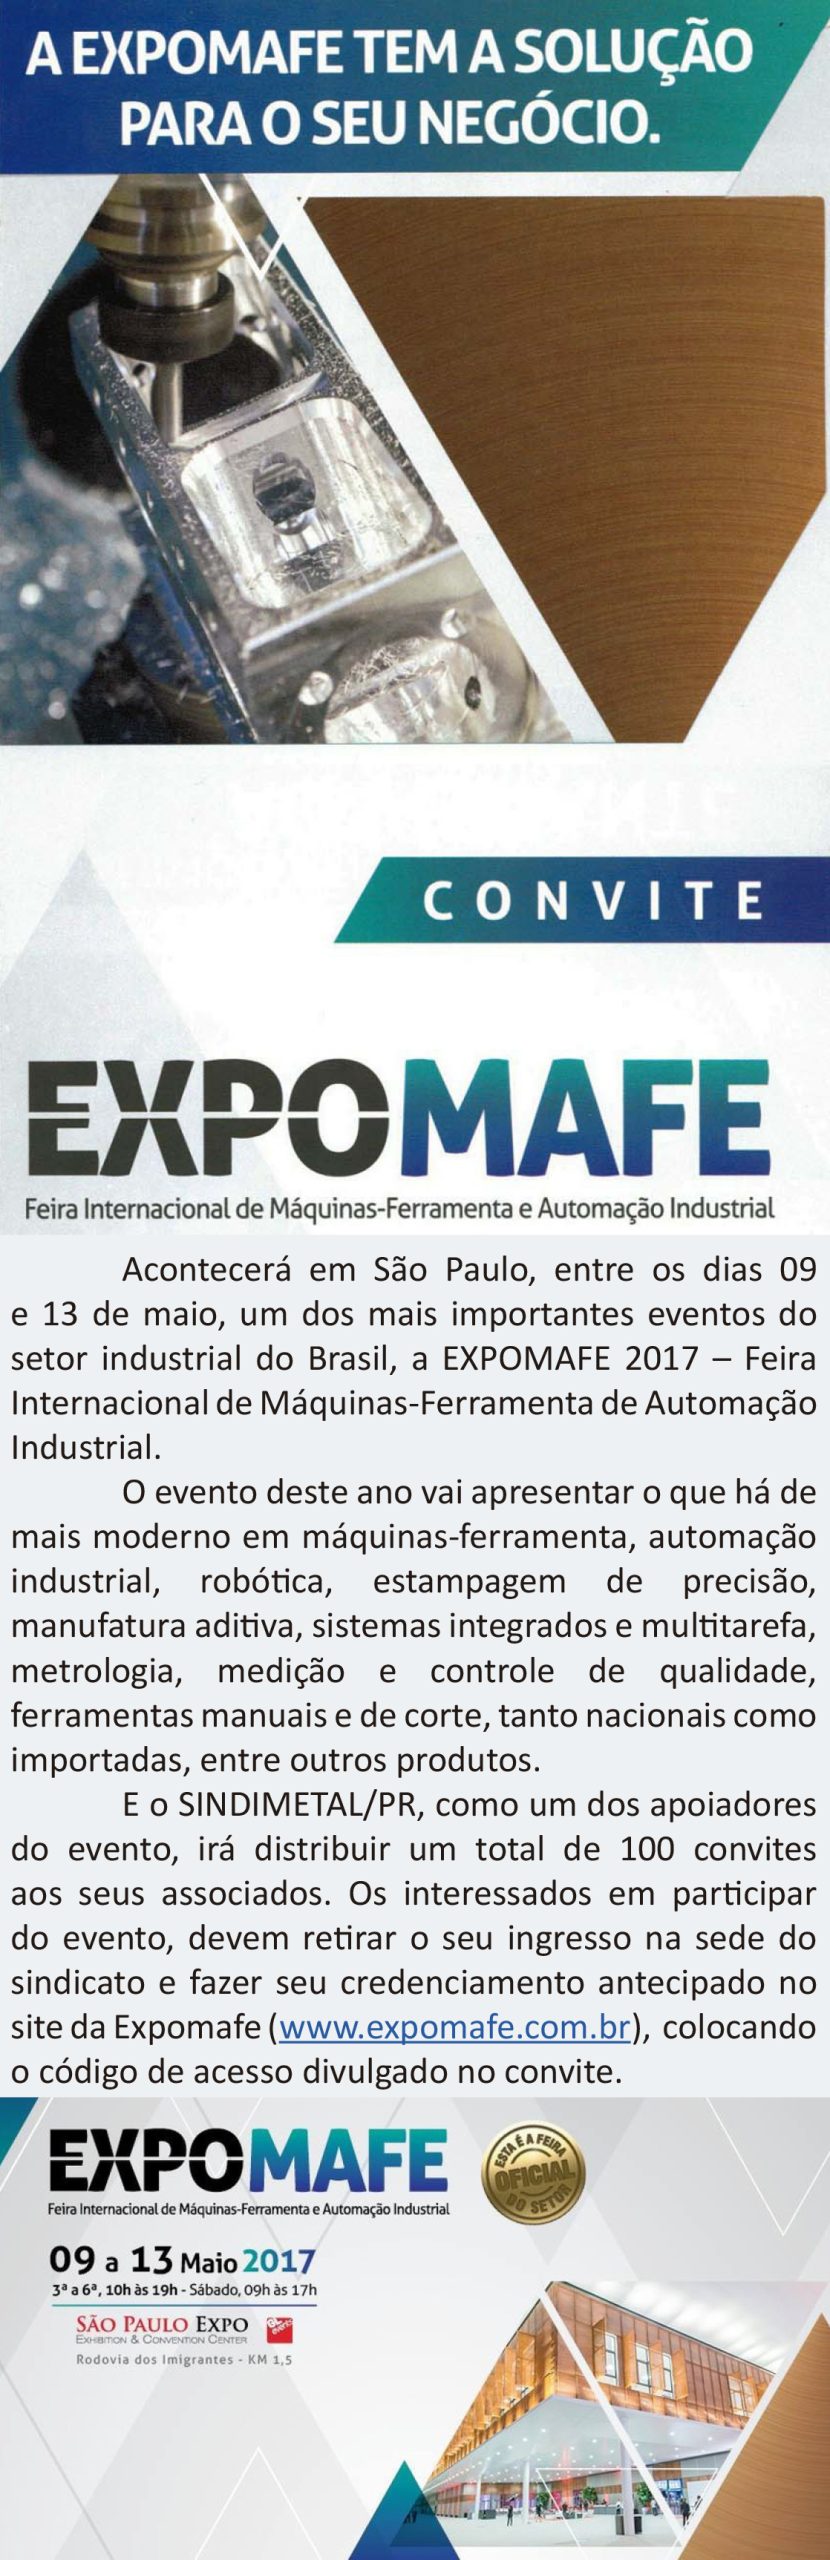 EXPOMAFE 2017